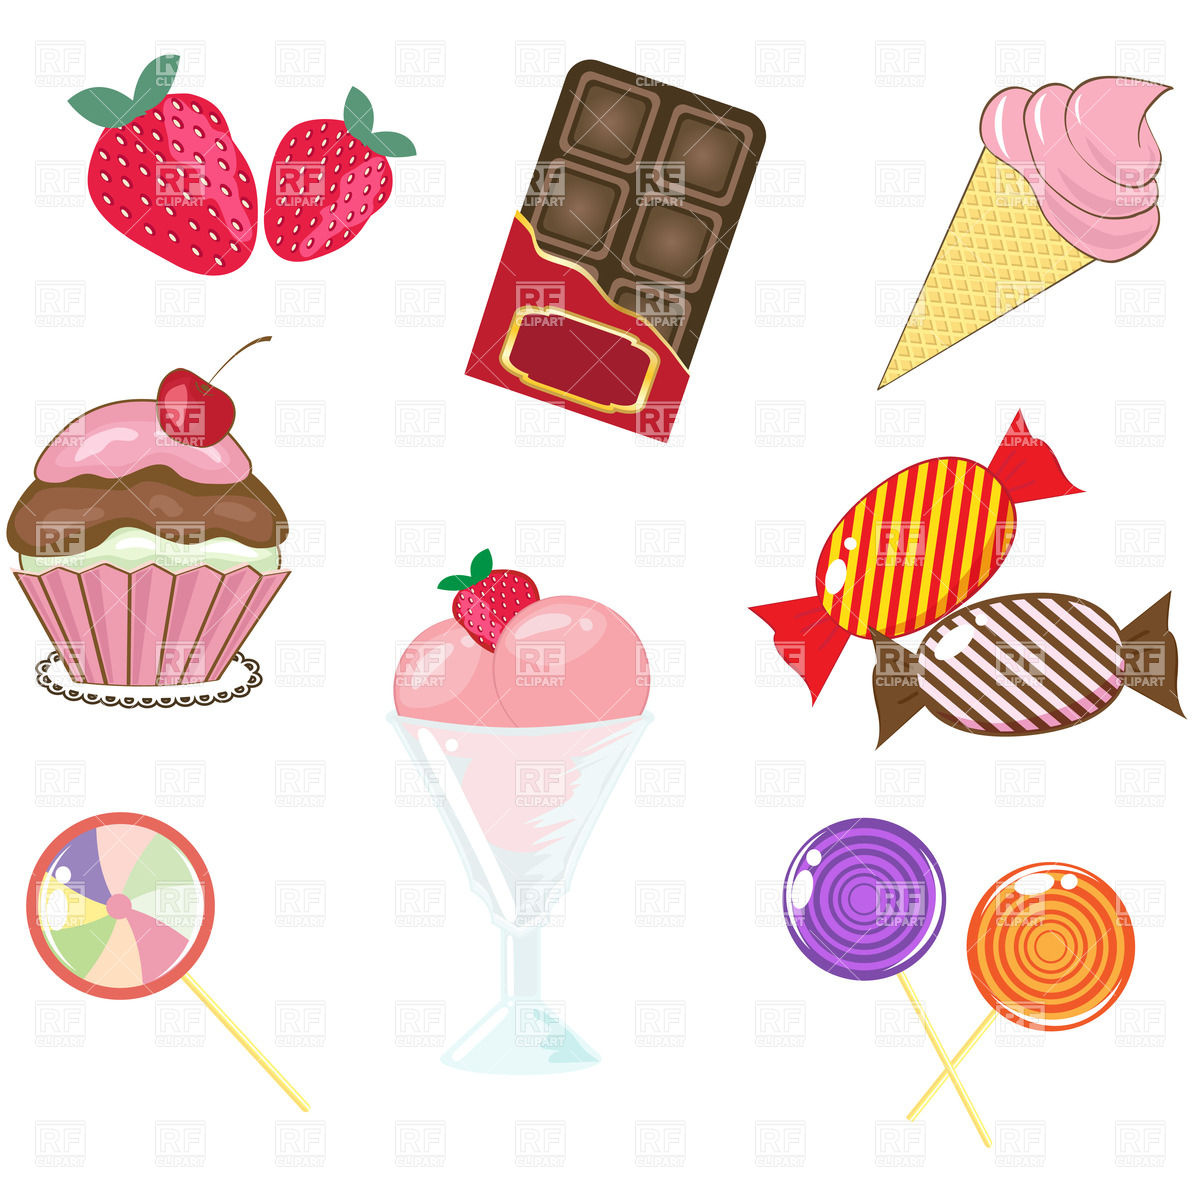     Pops   Desserts And Sweets Download Royalty Free Vector Clipart  Eps